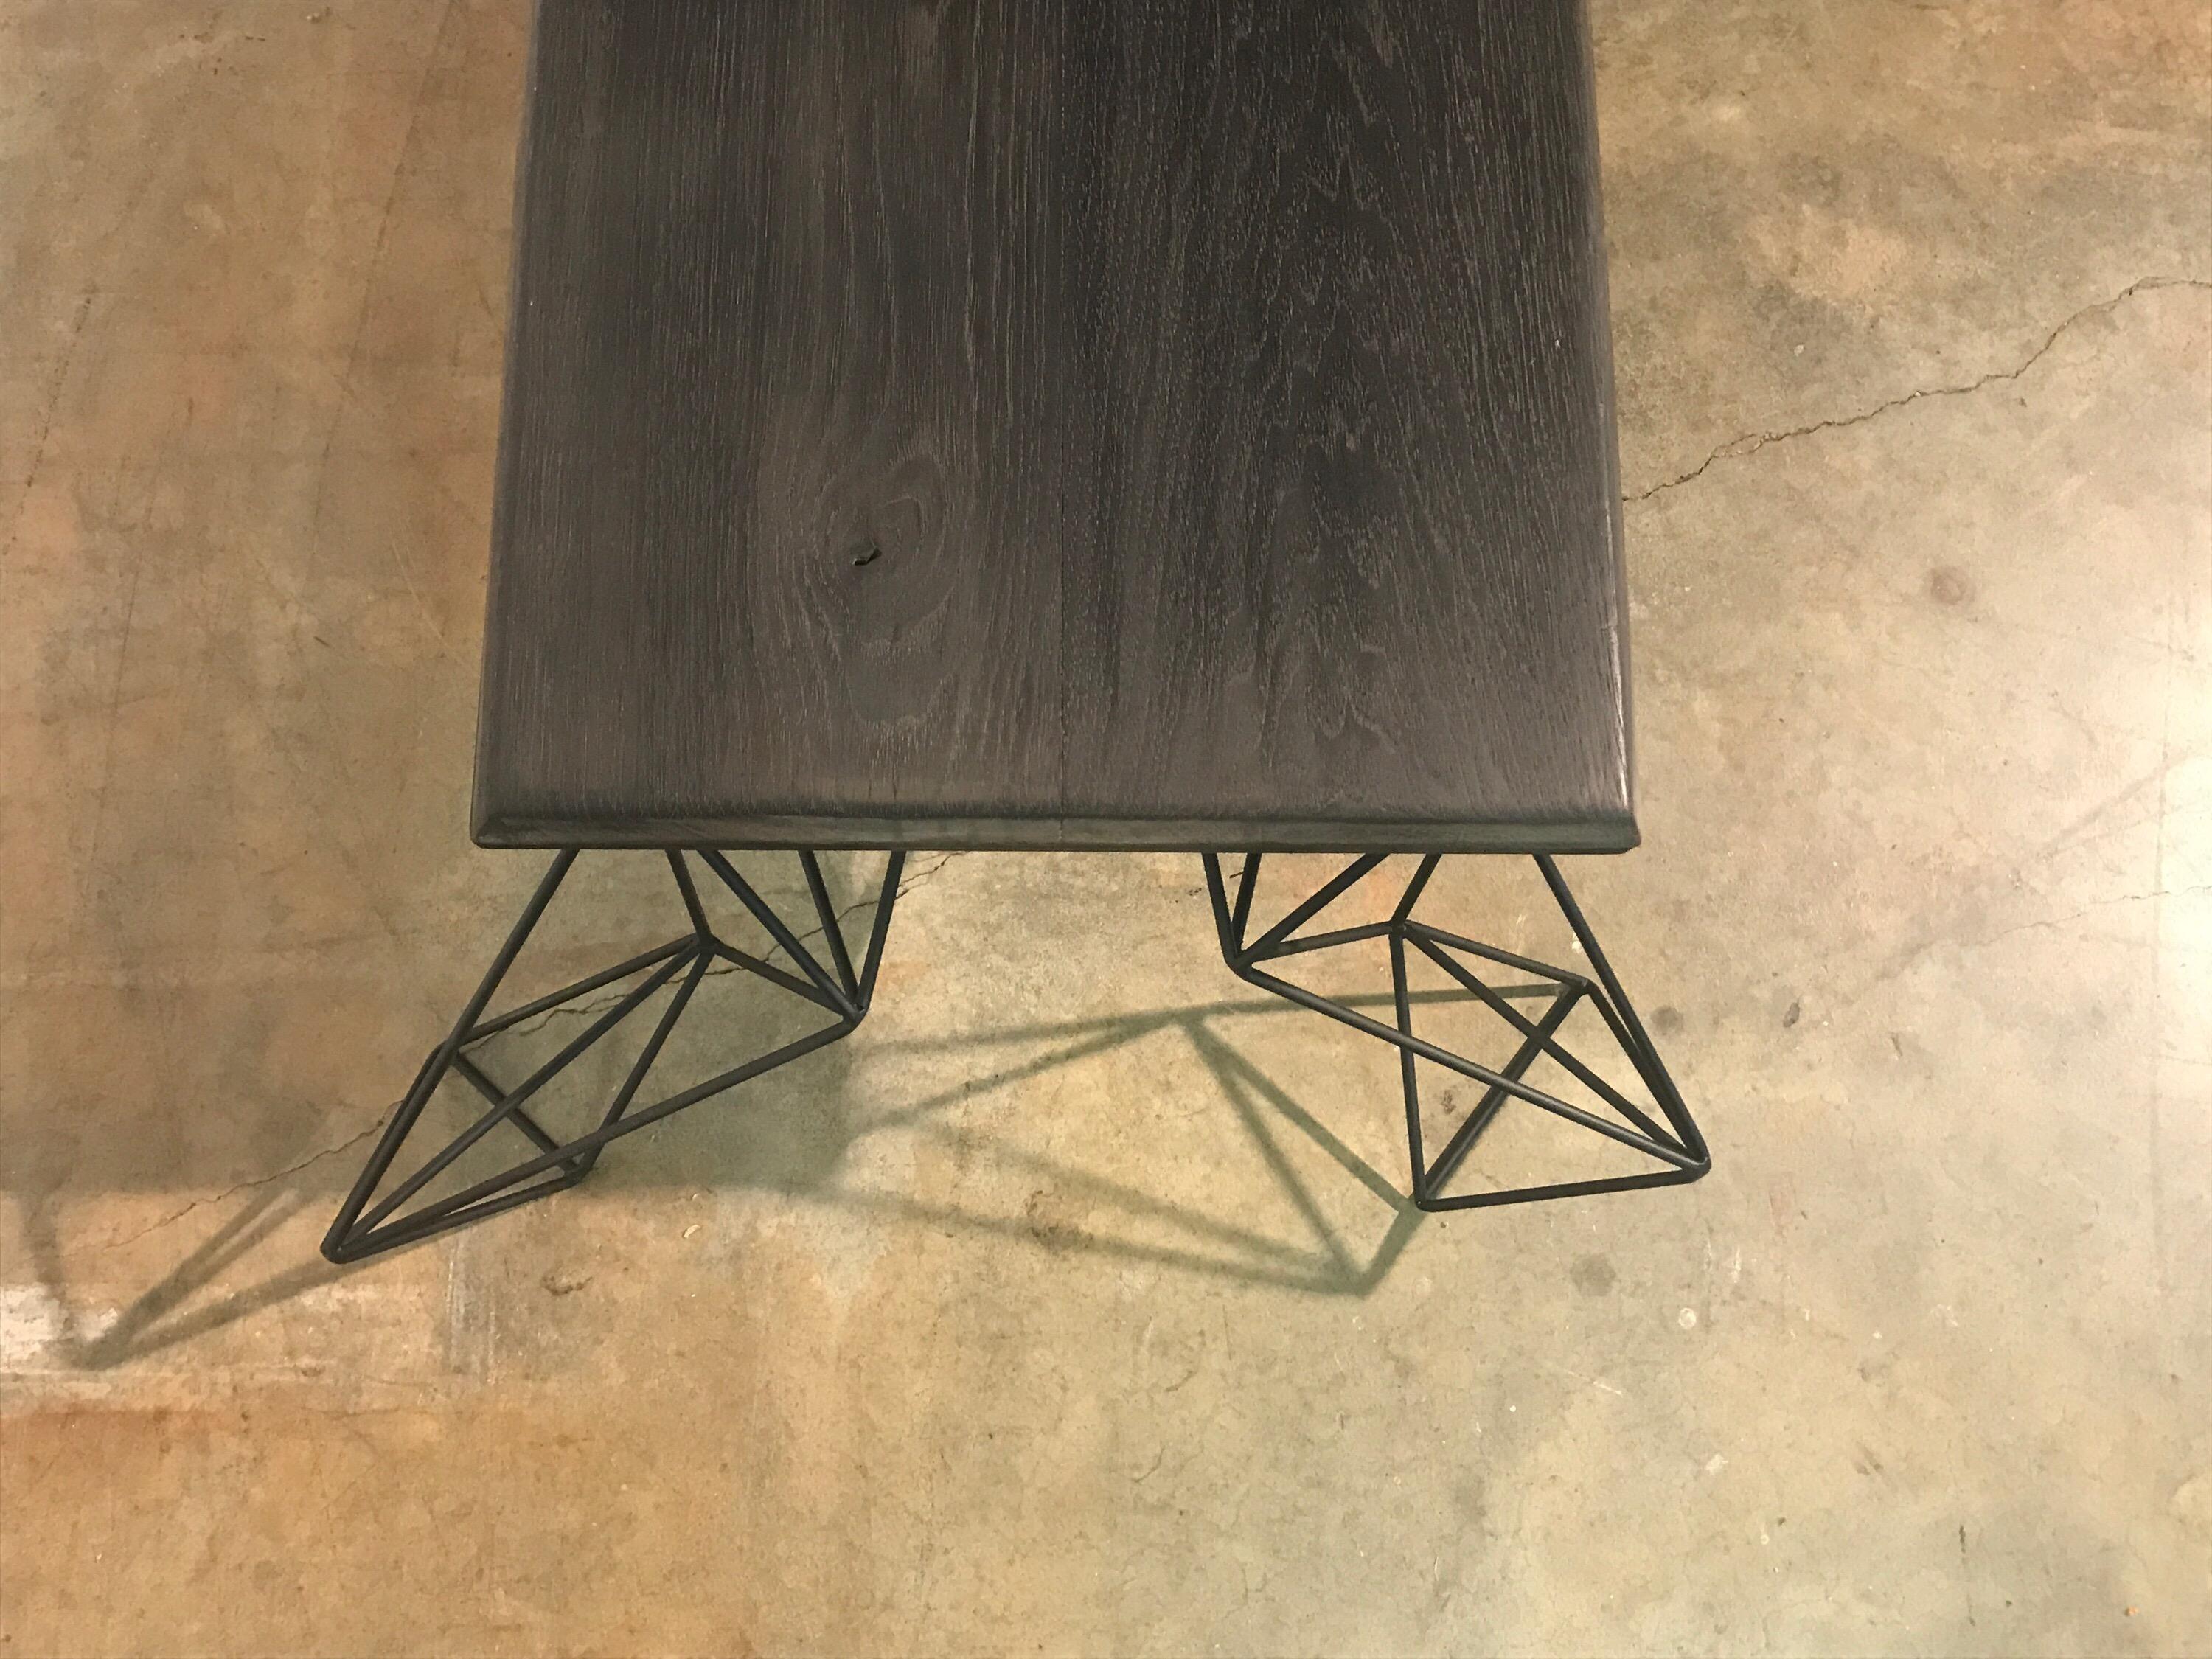 Sculptural Modern Geometric Custom Designed and Fabricated Coffee Table In Excellent Condition For Sale In Marietta, GA